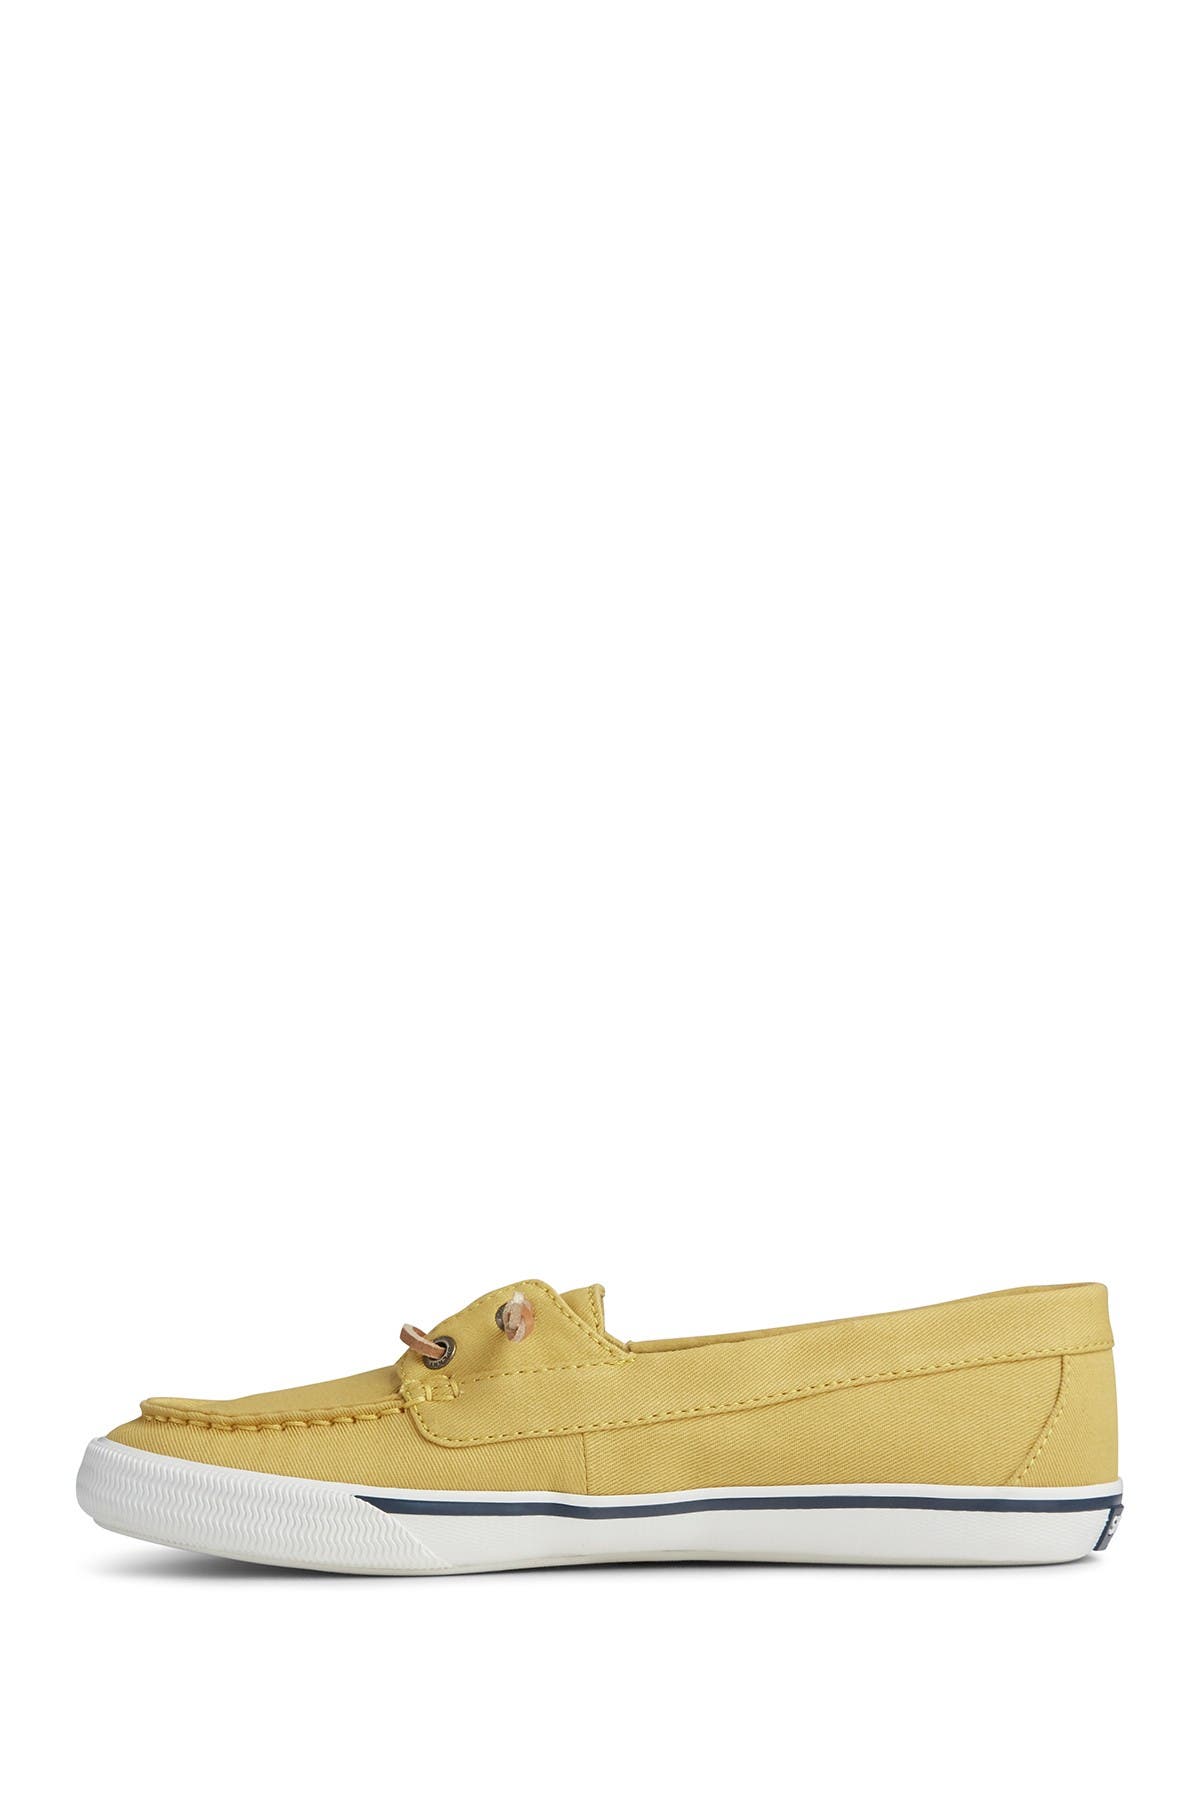 sperry lounge away yellow